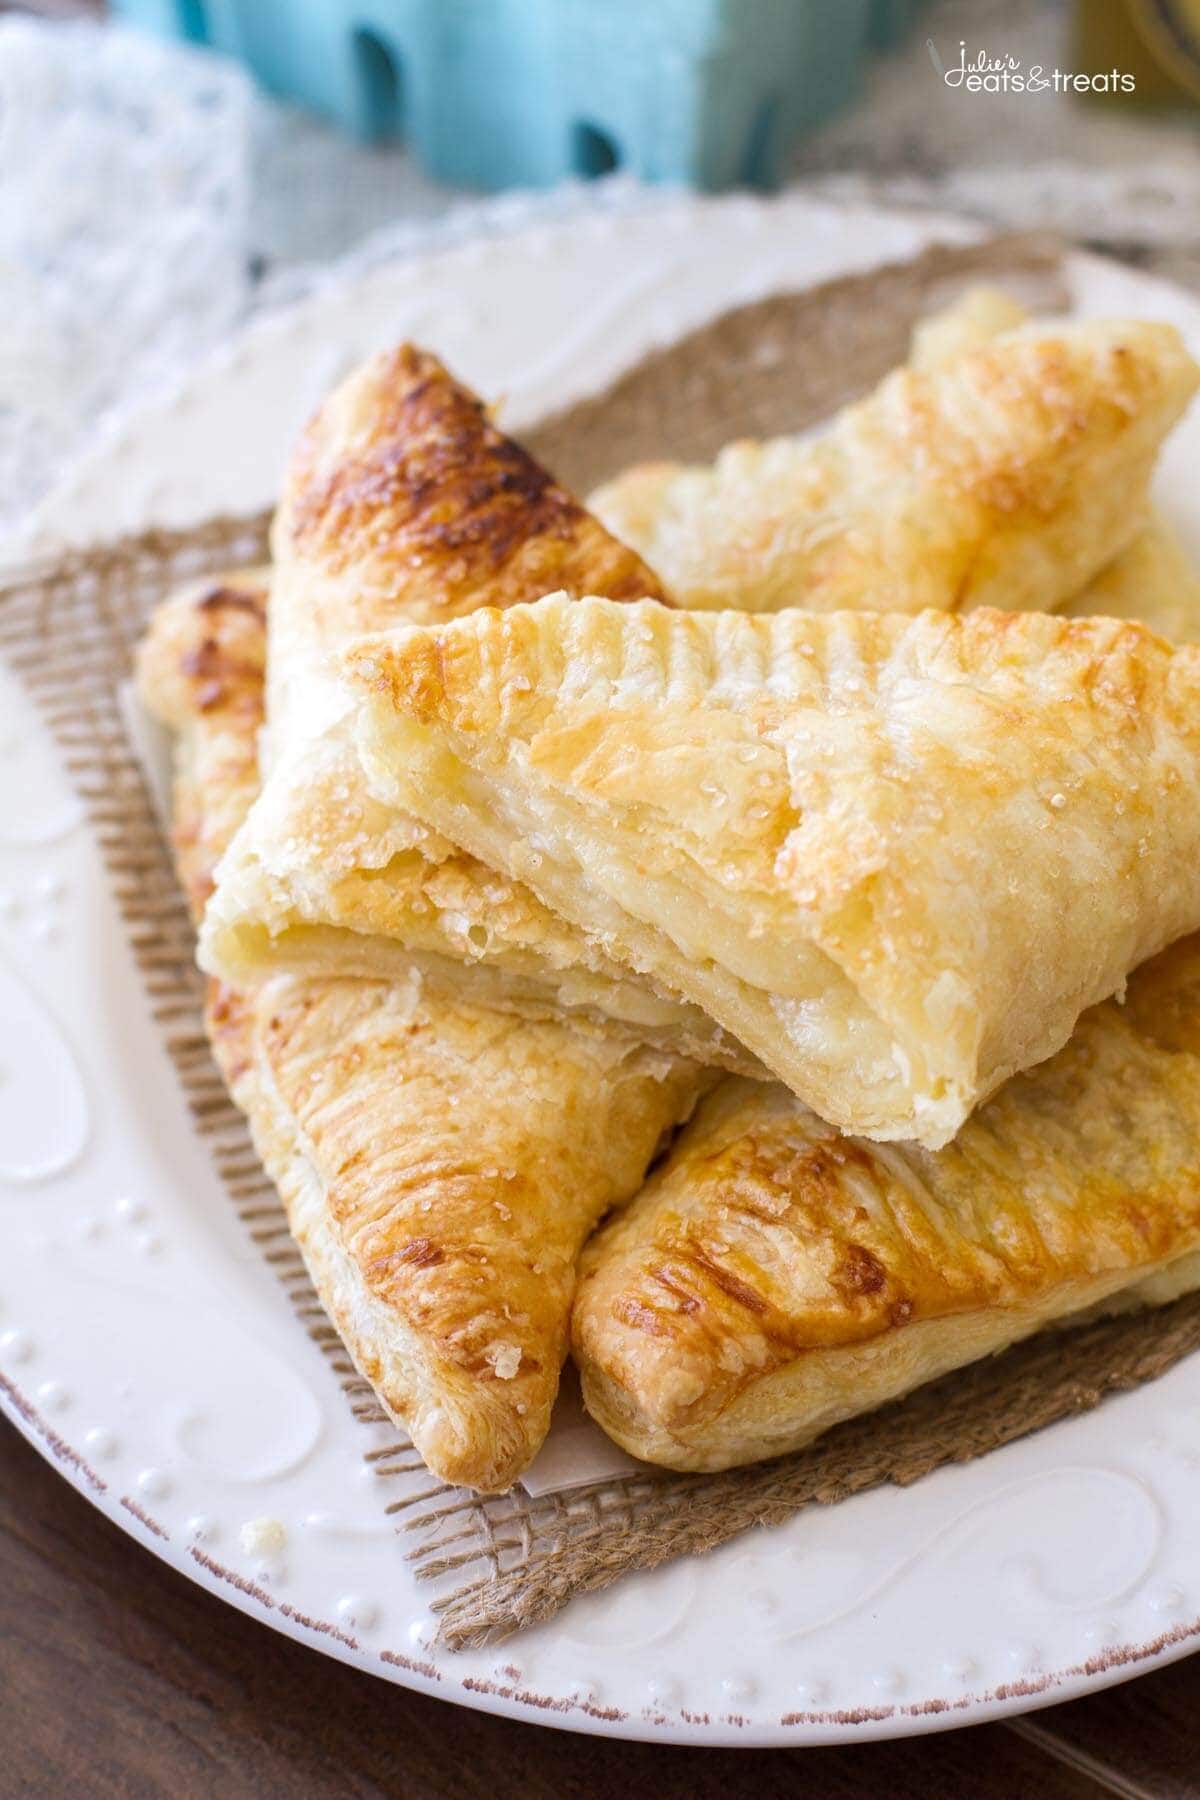 This easy lemon cream turnover recipe uses only 6 ingredients, making them a quick and easy breakfast, snack or dessert! 